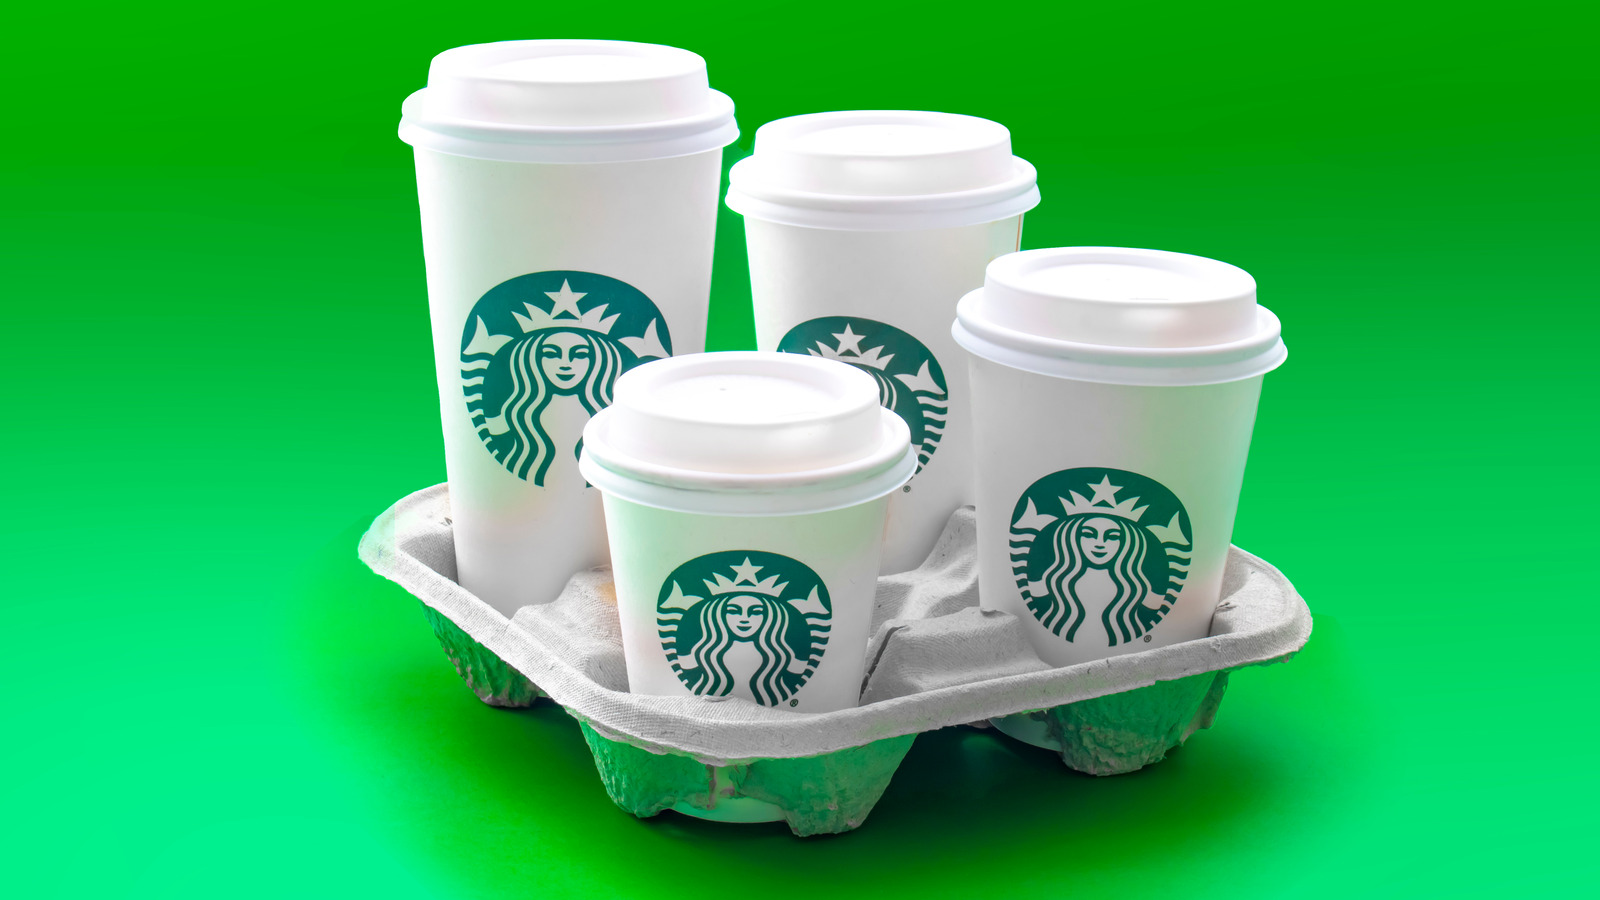 Starbucks holiday drinks (and holiday cups!) hit stores tomorrow